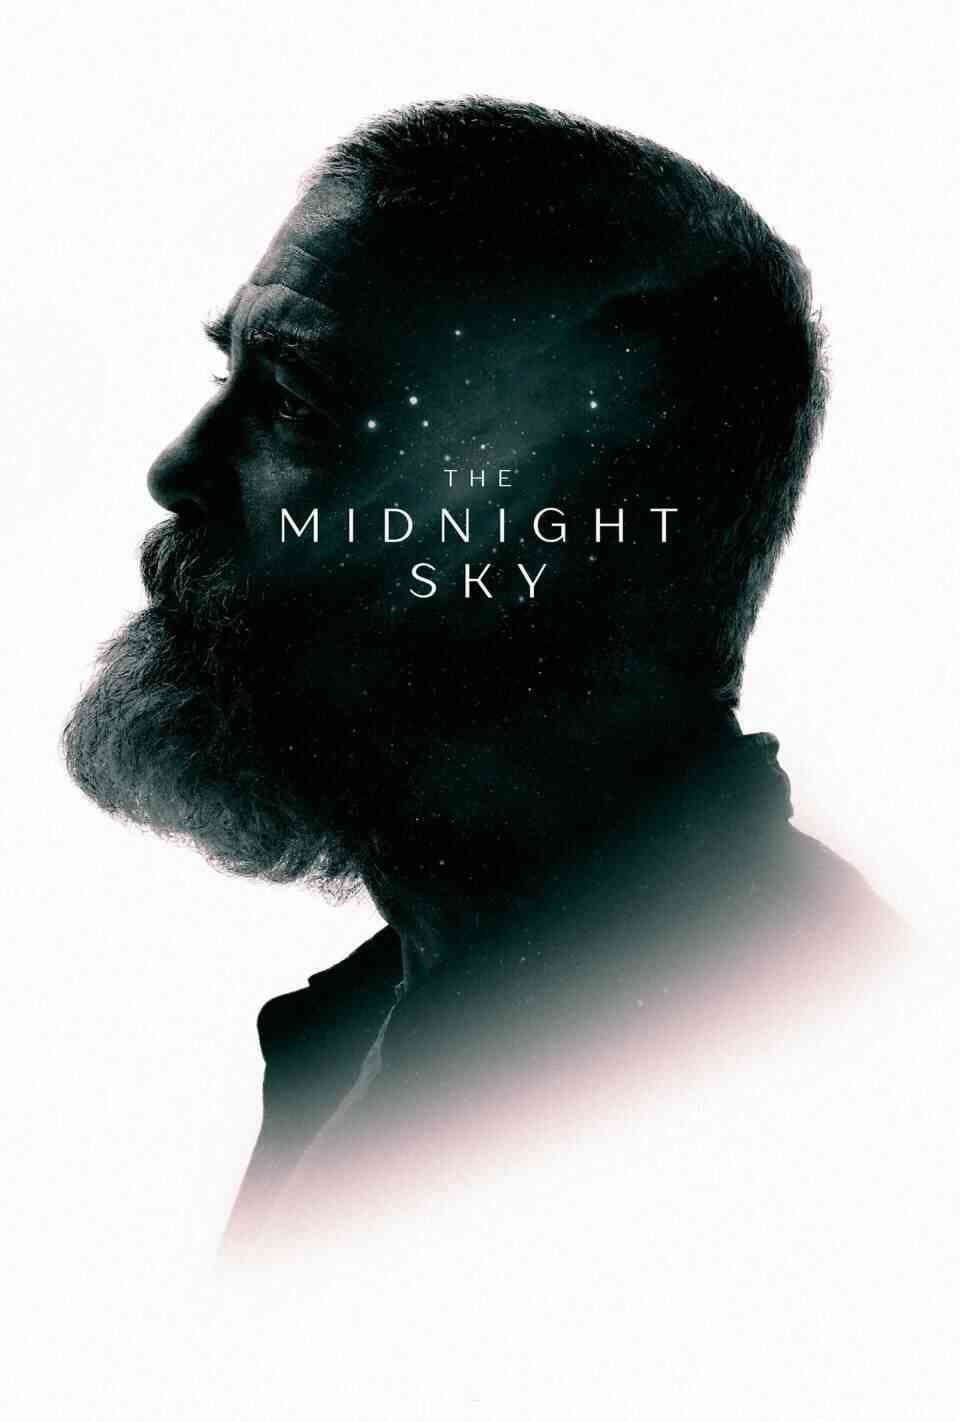 Read The Midnight Sky screenplay (poster)